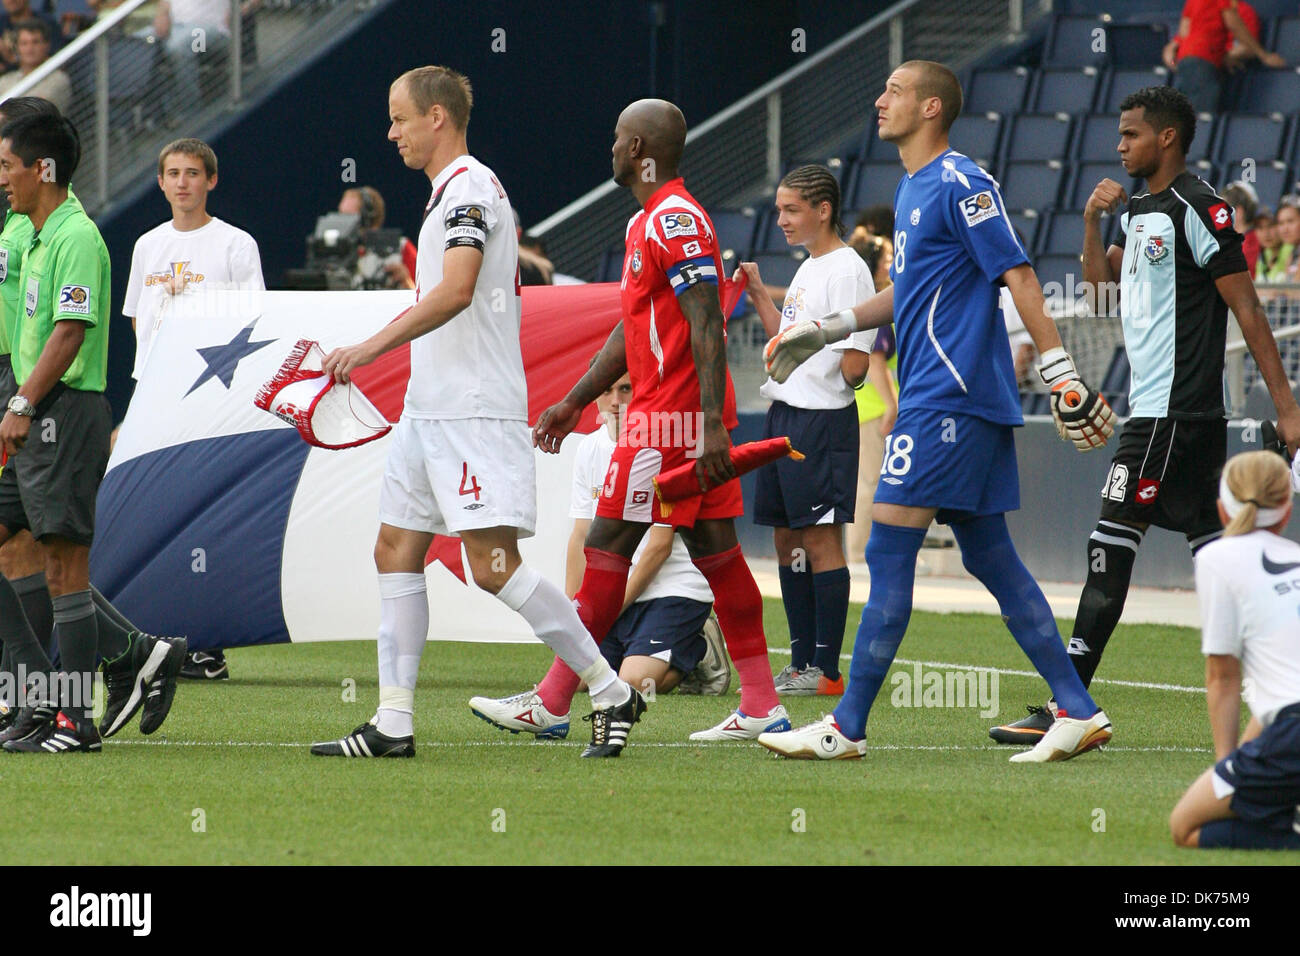 June 14, 2011 - Kansas City, Kansas, U.S - The teams are led onto the field by captains Kevin Mckenna, and Felipe Baloy. Canada and Panama tied 1-1 in Group C play of the 2011 CONCACAF Gold Cup at LIVESTRONG Sporting Park in Kansas City, Kansas. (Credit Image: © Tyson Hofsommer/Southcreek Global/ZUMAPRESS.com) Stock Photo